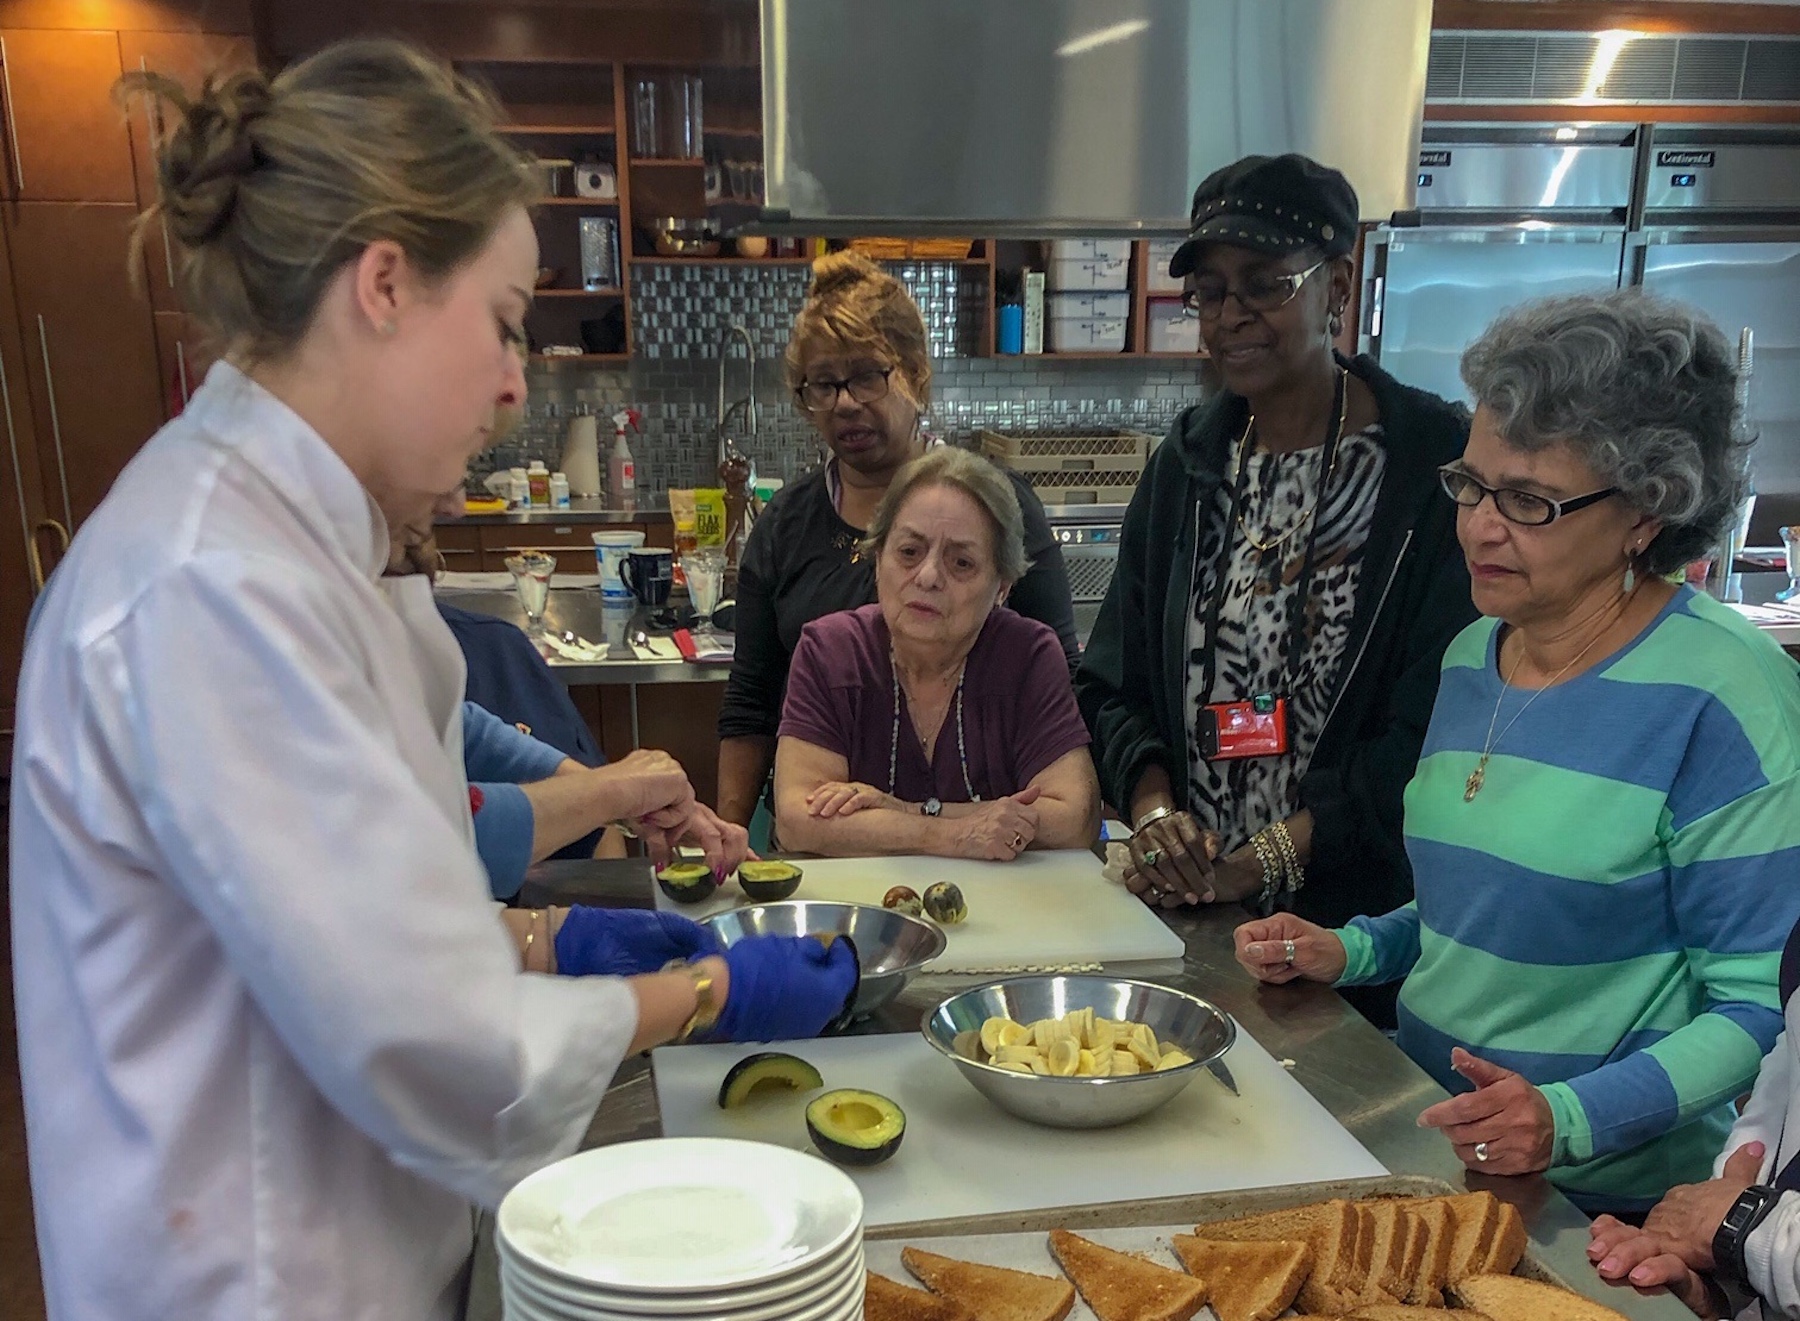 Chef Emilie Berner demonstrates a healthy recipe for members of the City of Peekskill’s Senior Nutrition Program.